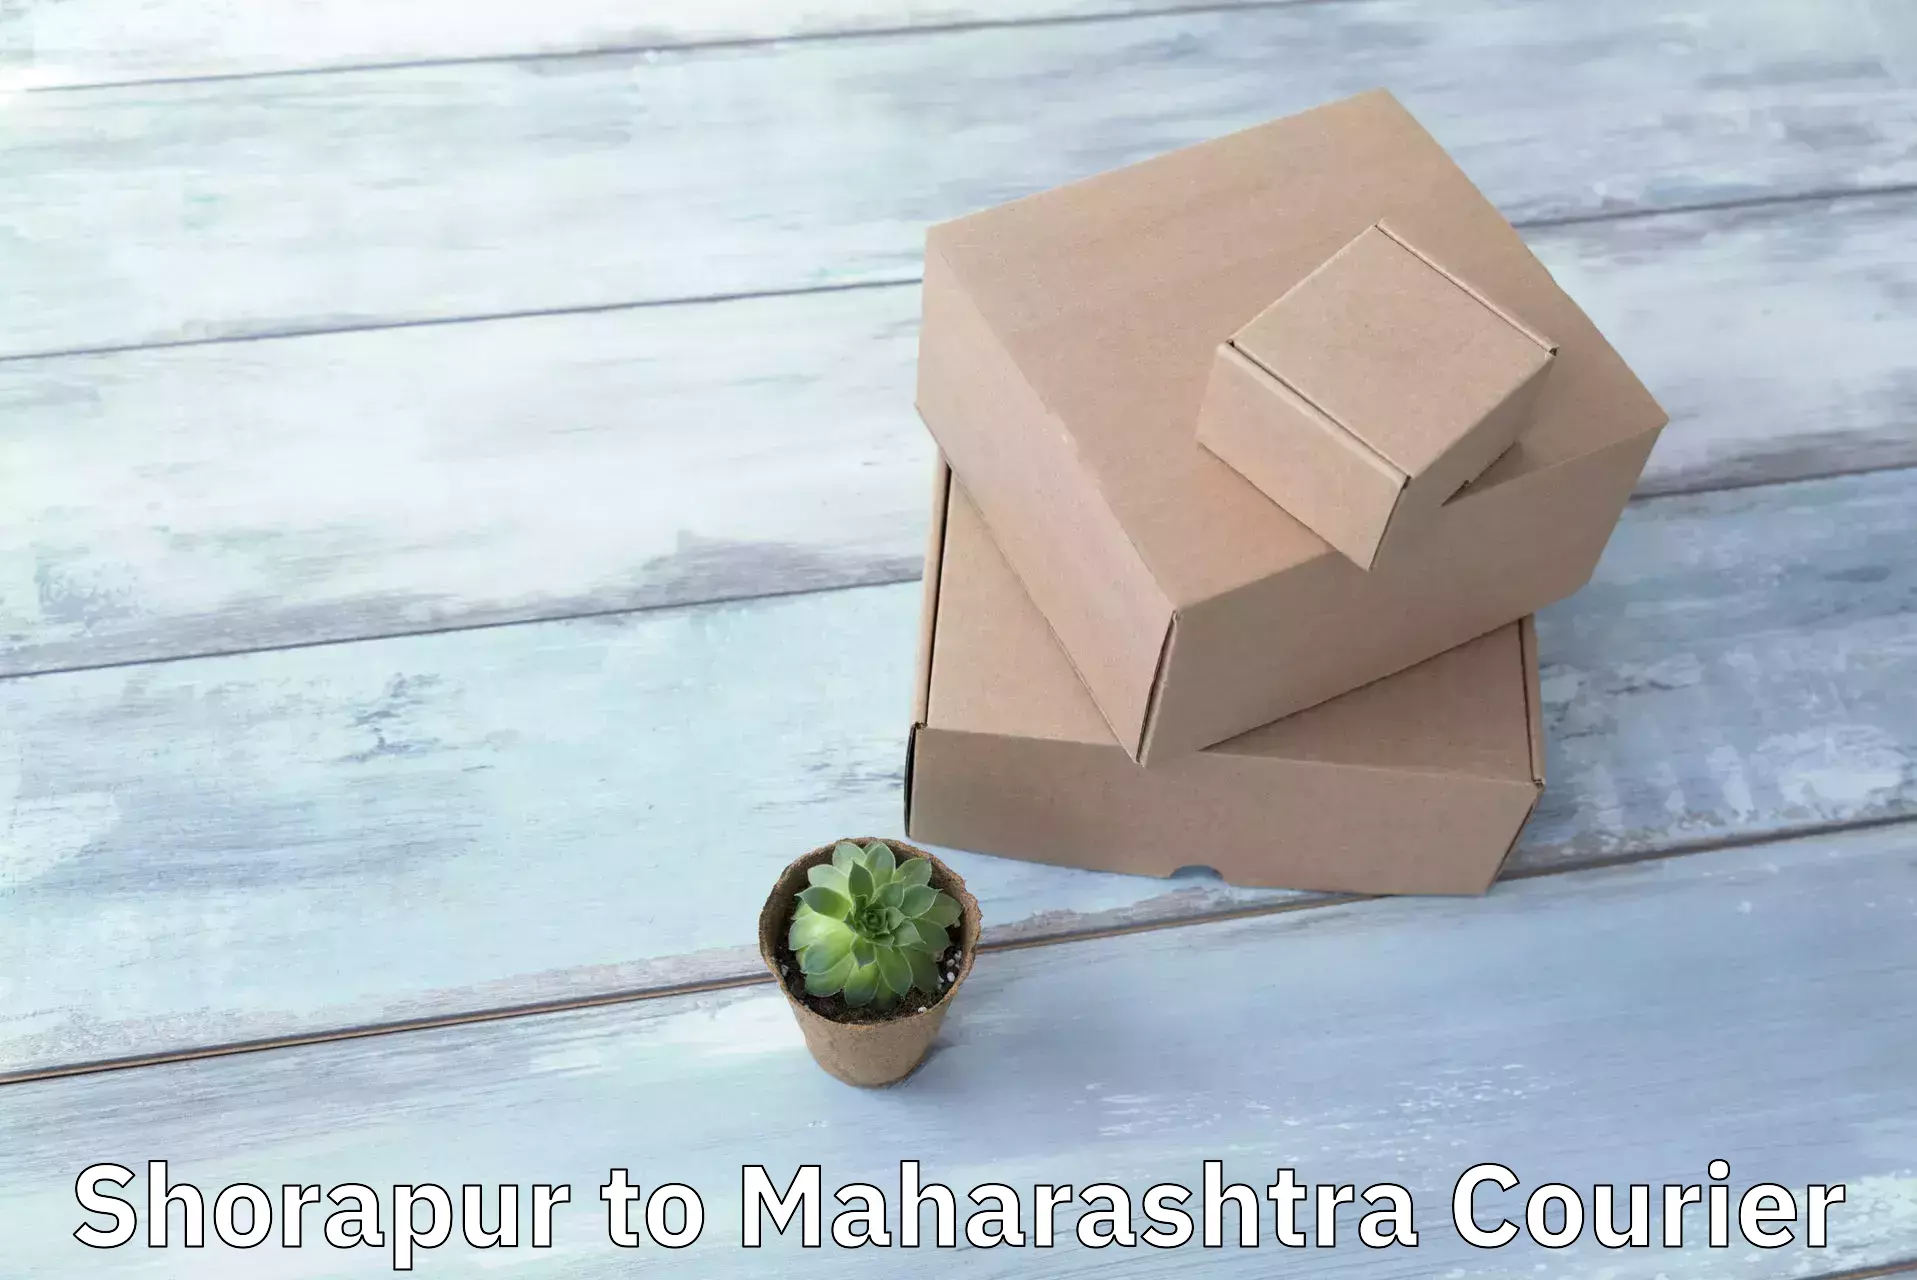 Residential courier service in Shorapur to Sindhudurg